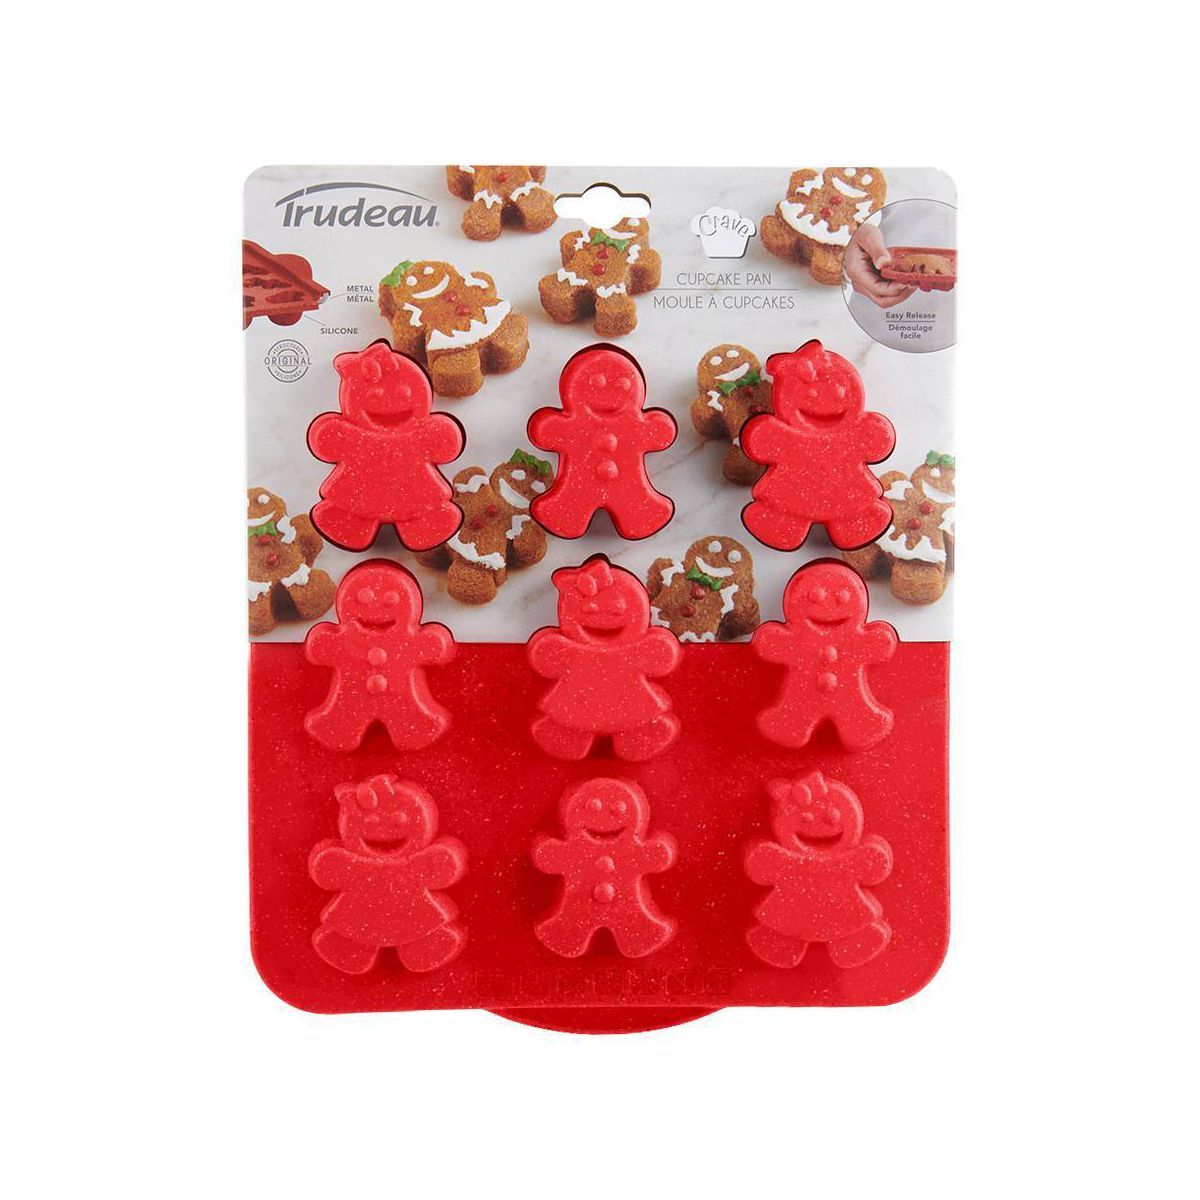 Trudeau 9.75'' Silicone Gingerbread People Shaped Cake Pans Red | Target